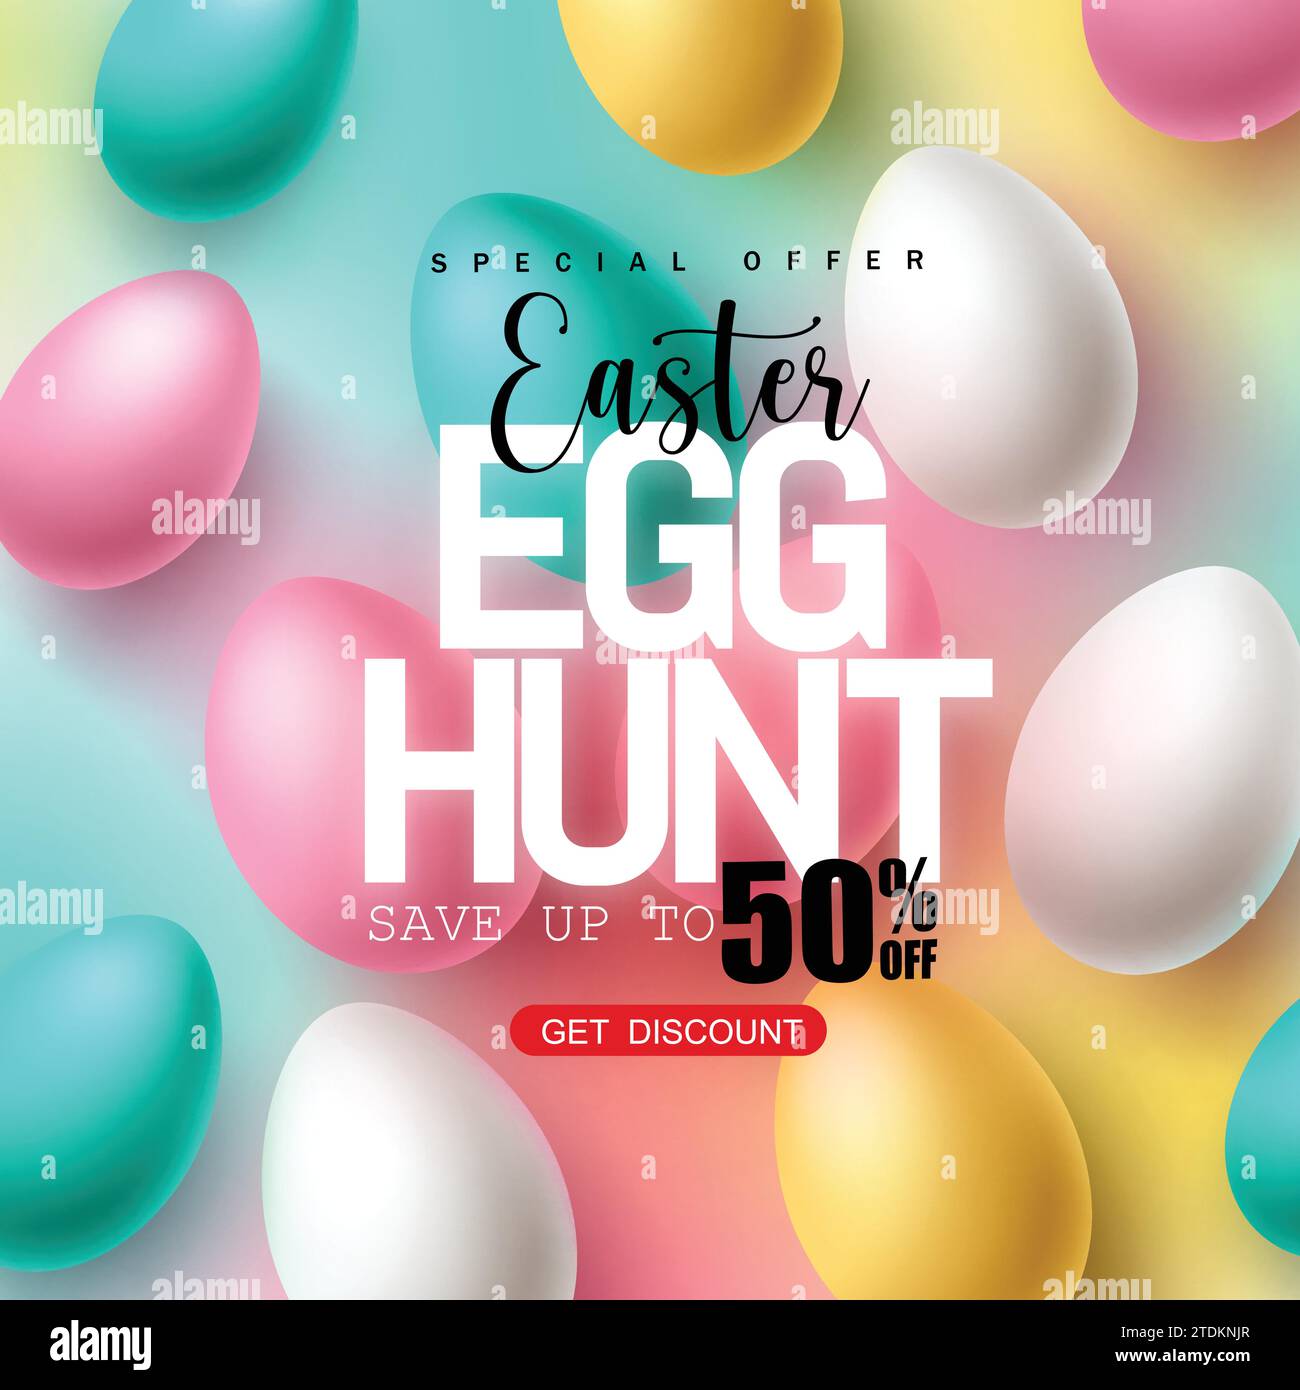 Easter sale text vector banner design. Easter egg hunt special offer 50% off discount for holiday season promotion with color pastel eggs elements. Stock Vector